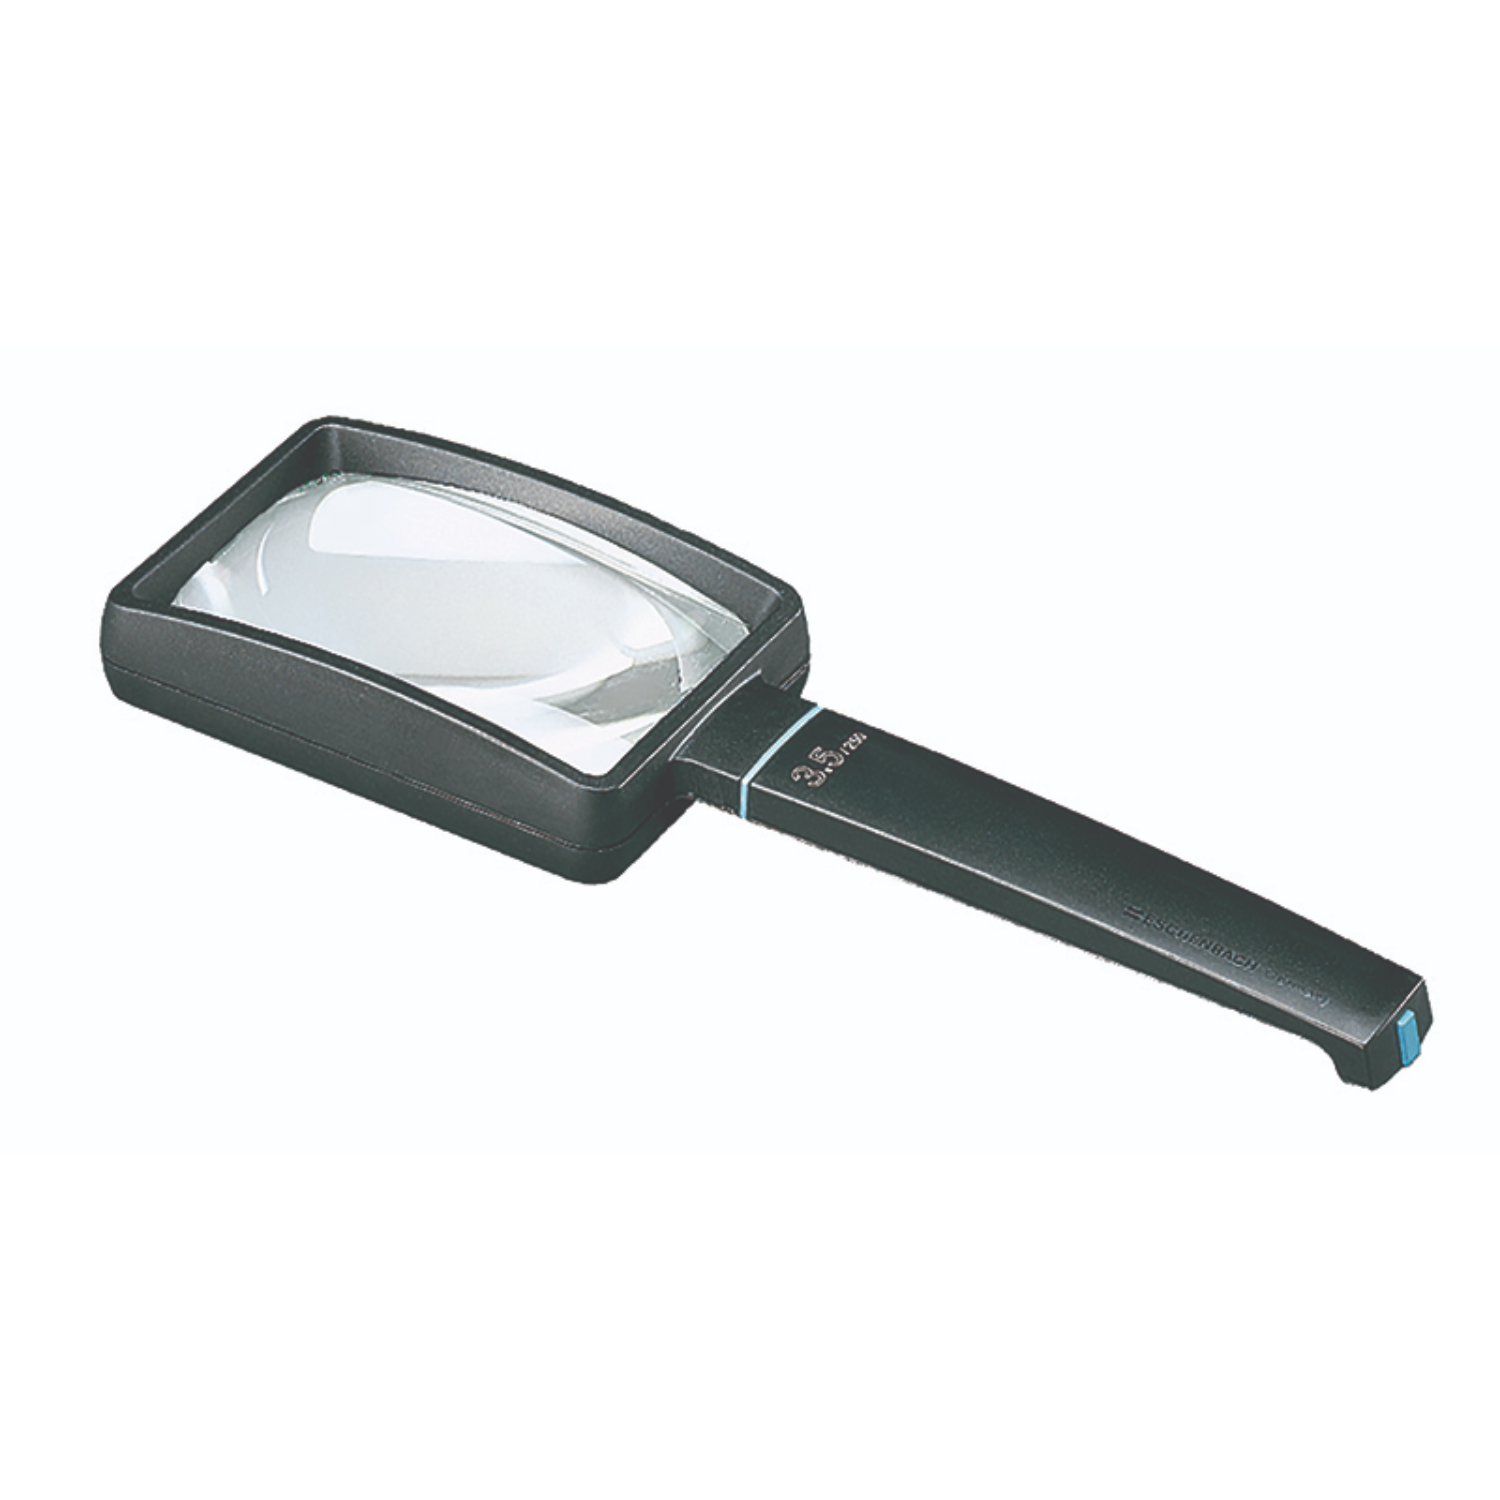 Professional Handheld Pocket Magnifier, High Power 8x Aspheric Lens  Magnifying Glass, German Quality Magnifier that is MADE IN USA